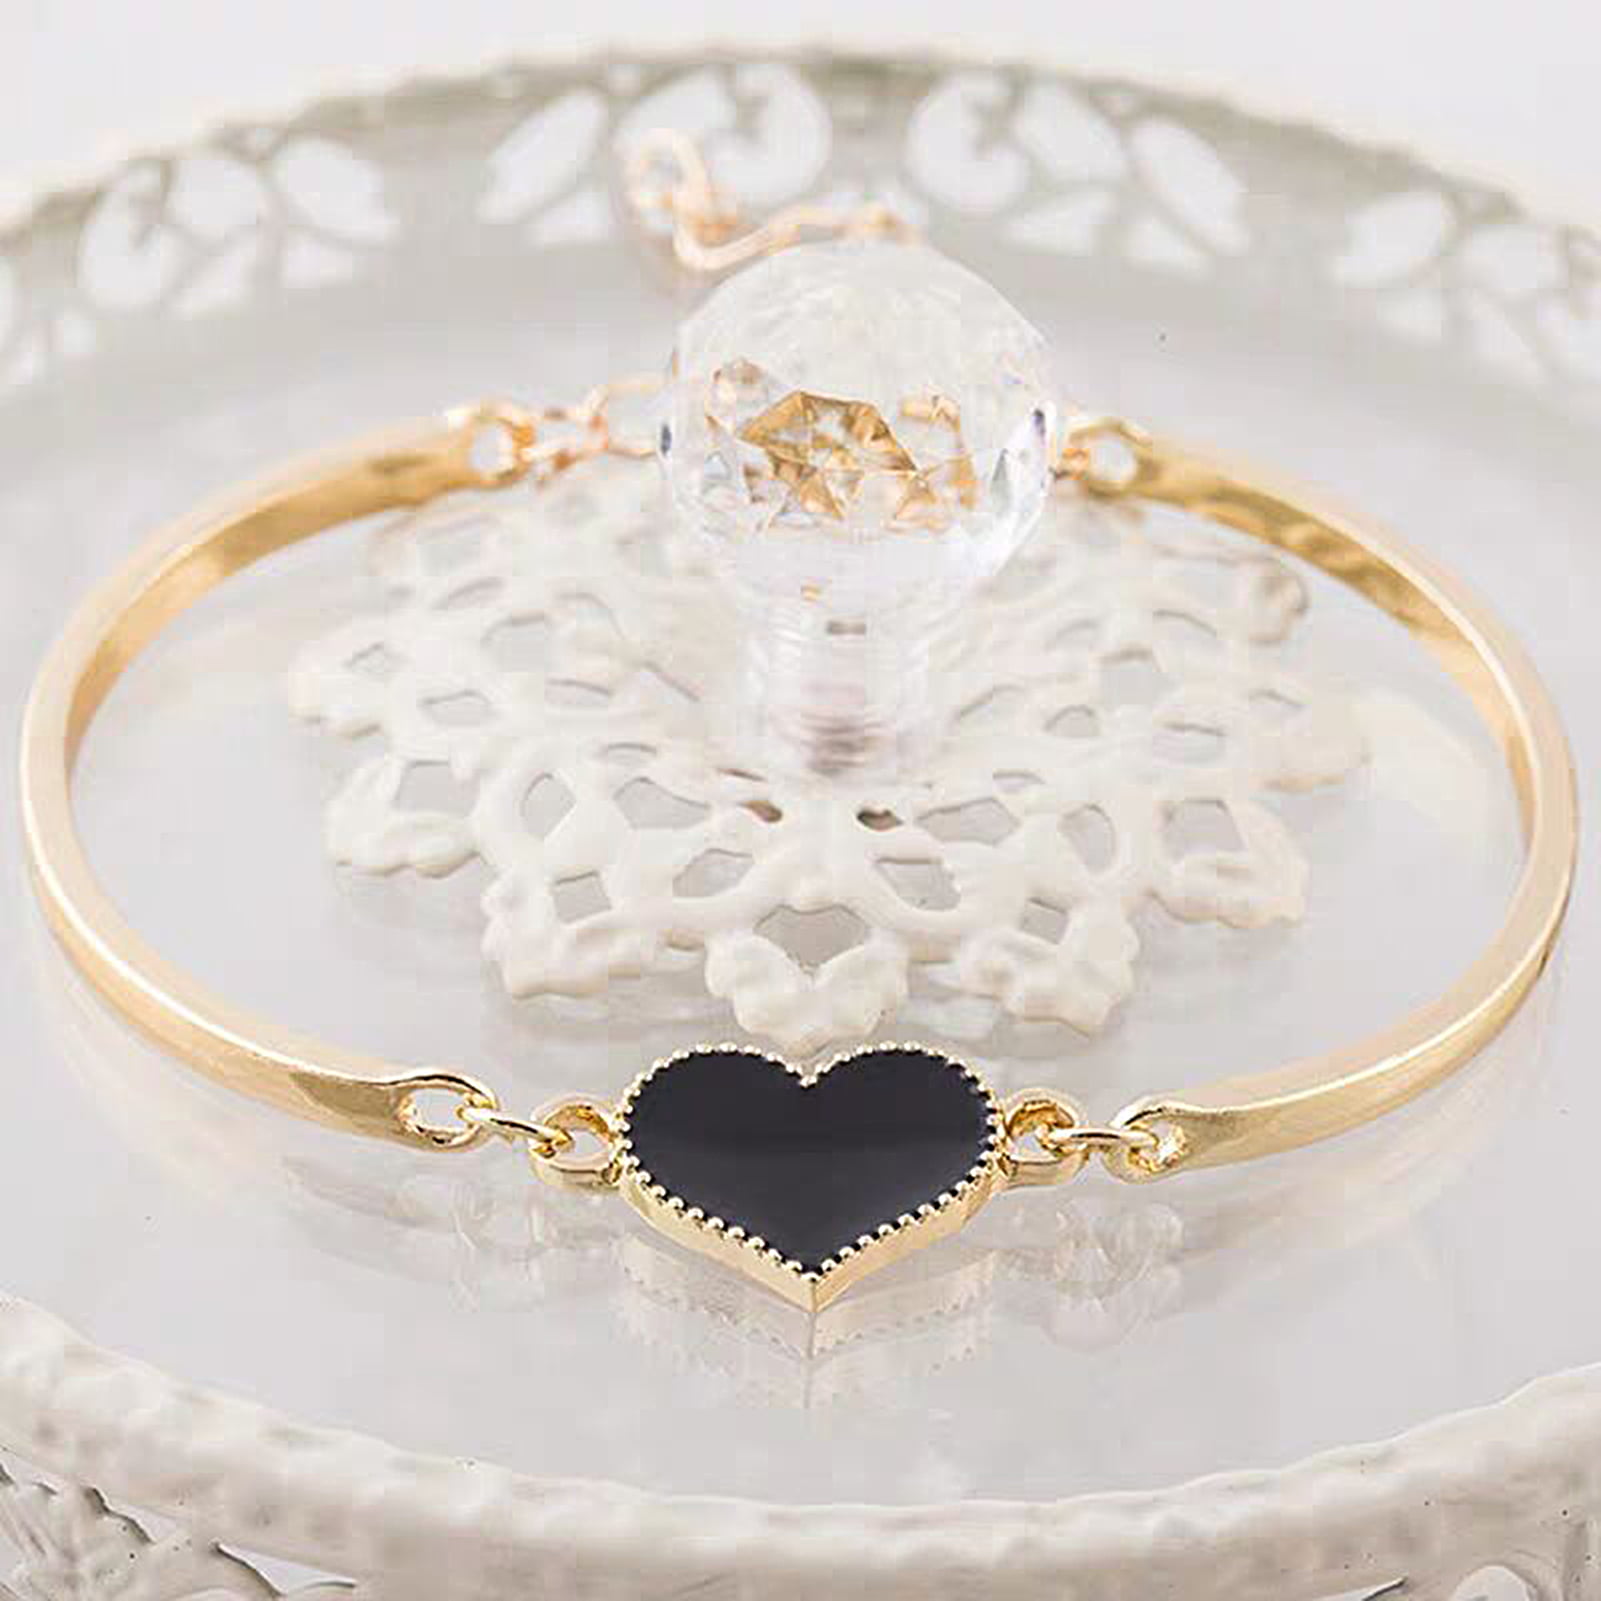 EE Heart Sublimation Bracelets: DIY Adjustable Bangles For Valentines Day  Parties, Wholesale Zinc Alloy Charms From Hot Wind, $1.77